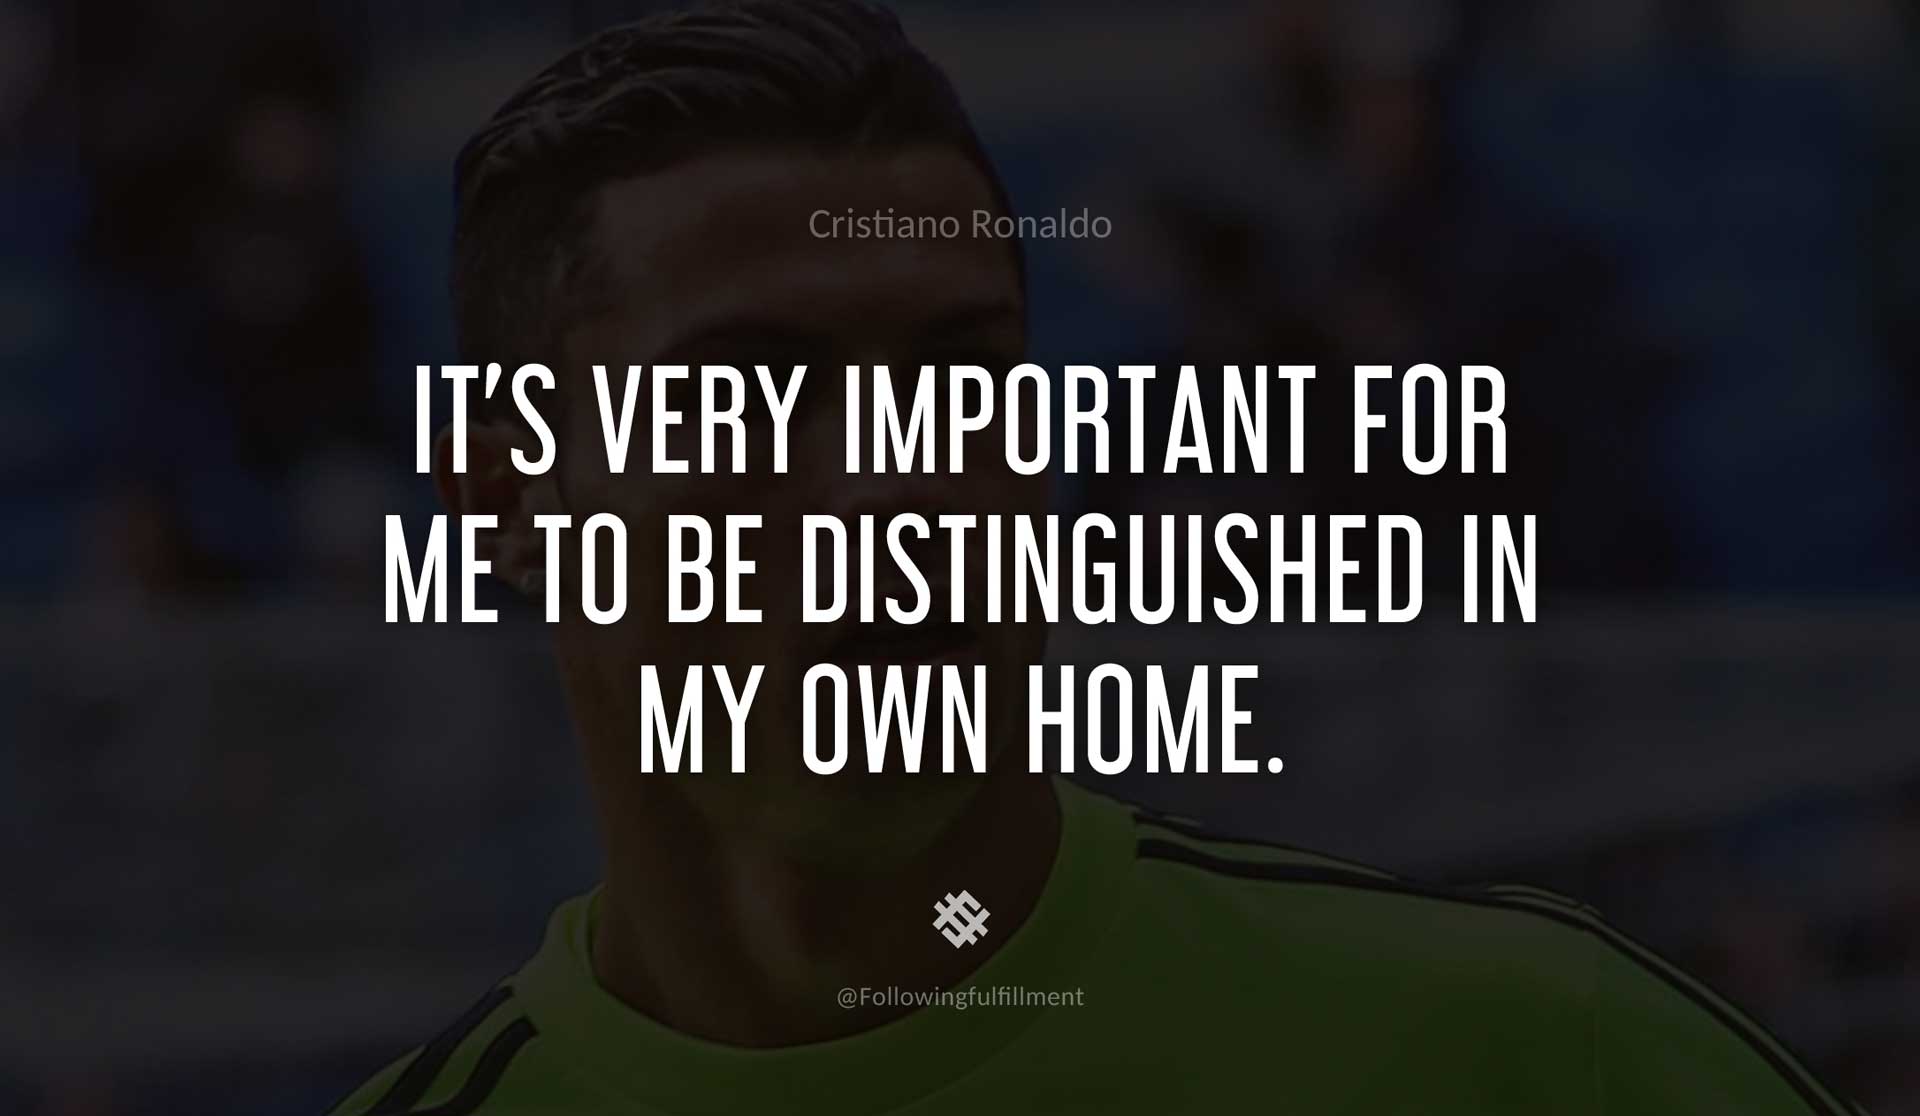 It's-very-important-for-me-to-be-distinguished-in-my-own-home.-CRISTIANO-RONALDO-Quote.jpg